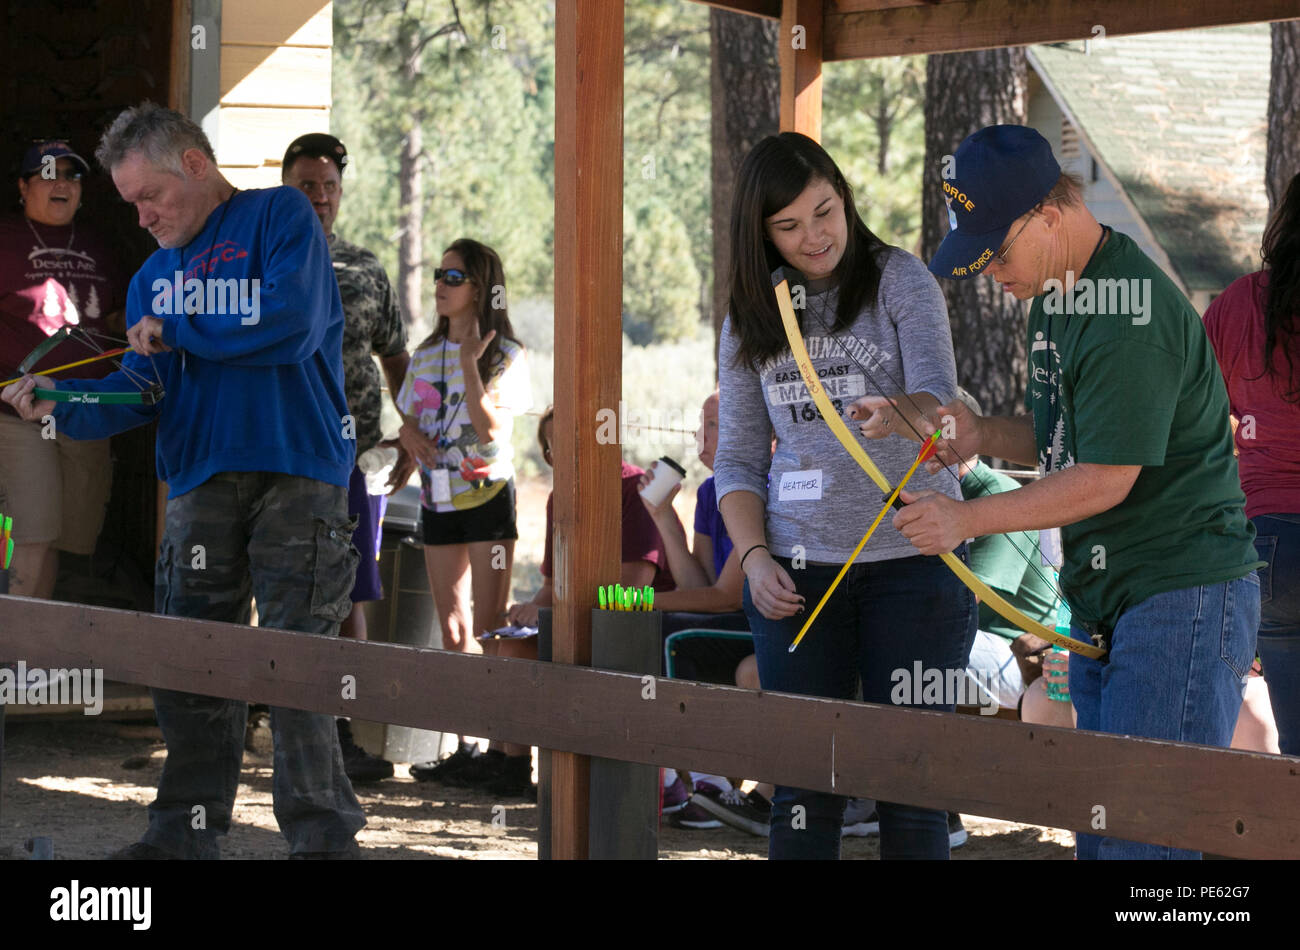 Heather Frausto, wife of Sgt. Nicholas Frausto, chaplain’s assistant, Protestant Chapel, helps a camper use a bow at the archery station of the Desert Arc Sports and Recreation Camp at Camp Ronald McDonald, Idyllwild, Calif., Oct. 3, 2015. (Official Marine Corps photo by Lance Cpl. Thomas Mudd/ Released) Stock Photo